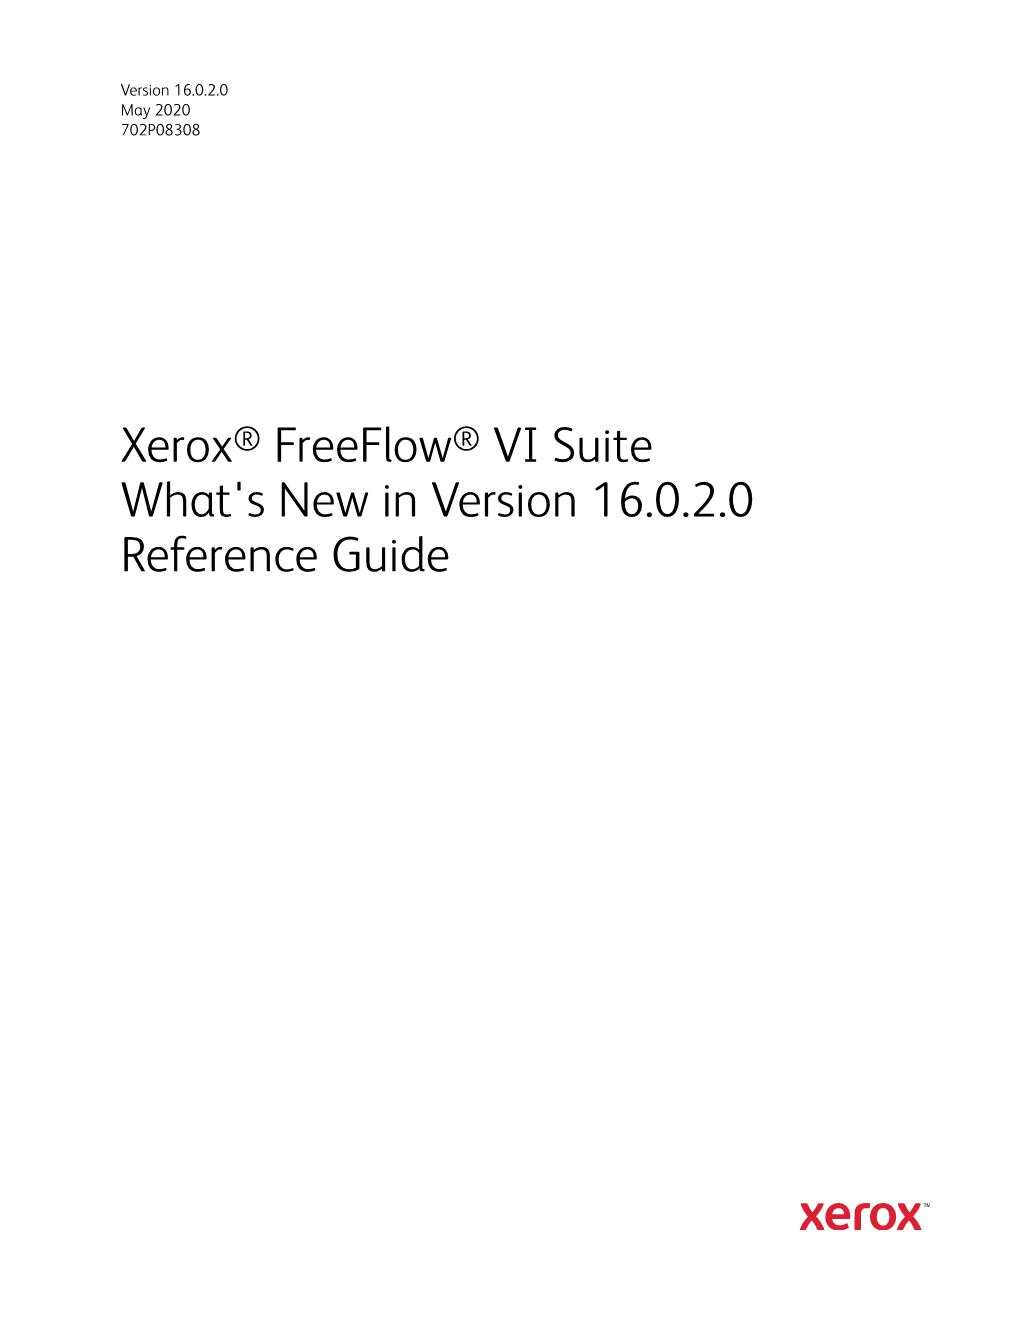 Xerox® Freeflow® VI Suite What's New in Version 16.0.2.0 Reference Guide © 2020 Xerox Corporation